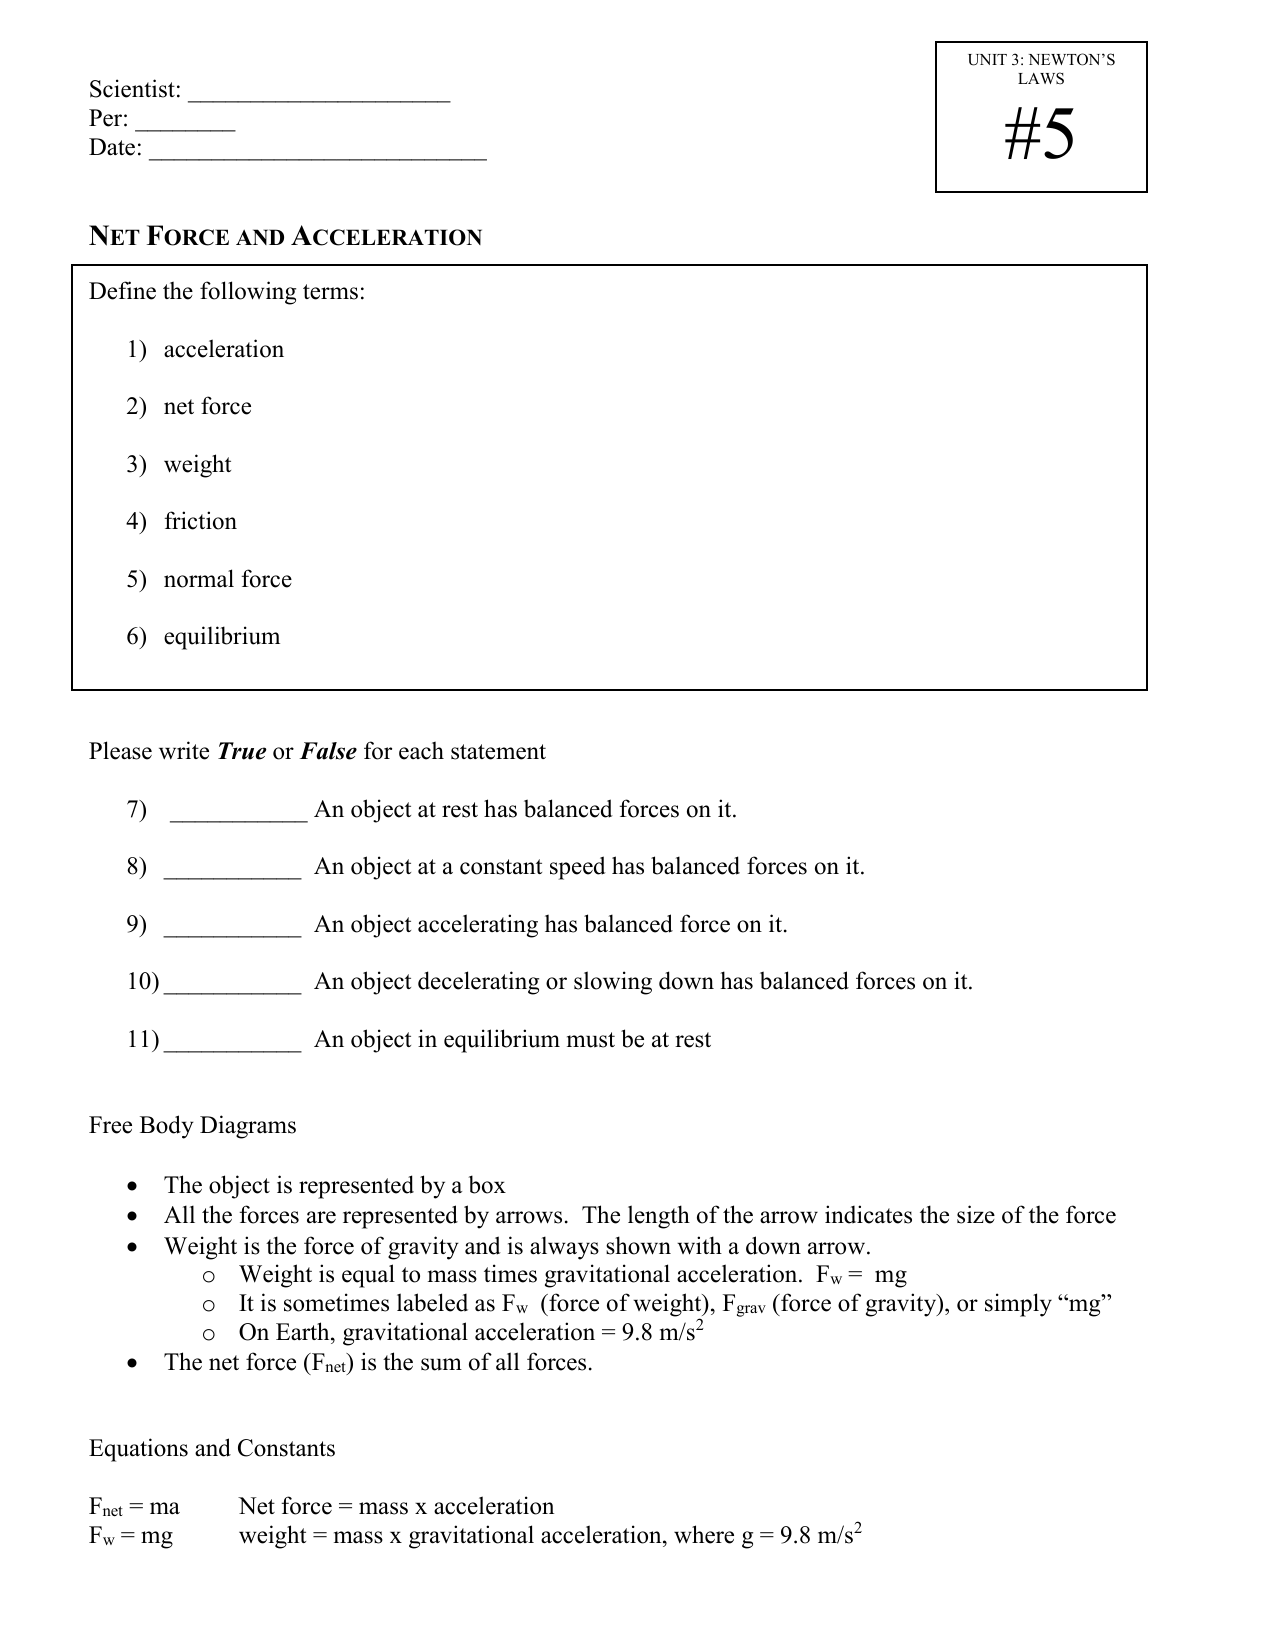 force-and-acceleration-worksheet-answer-key